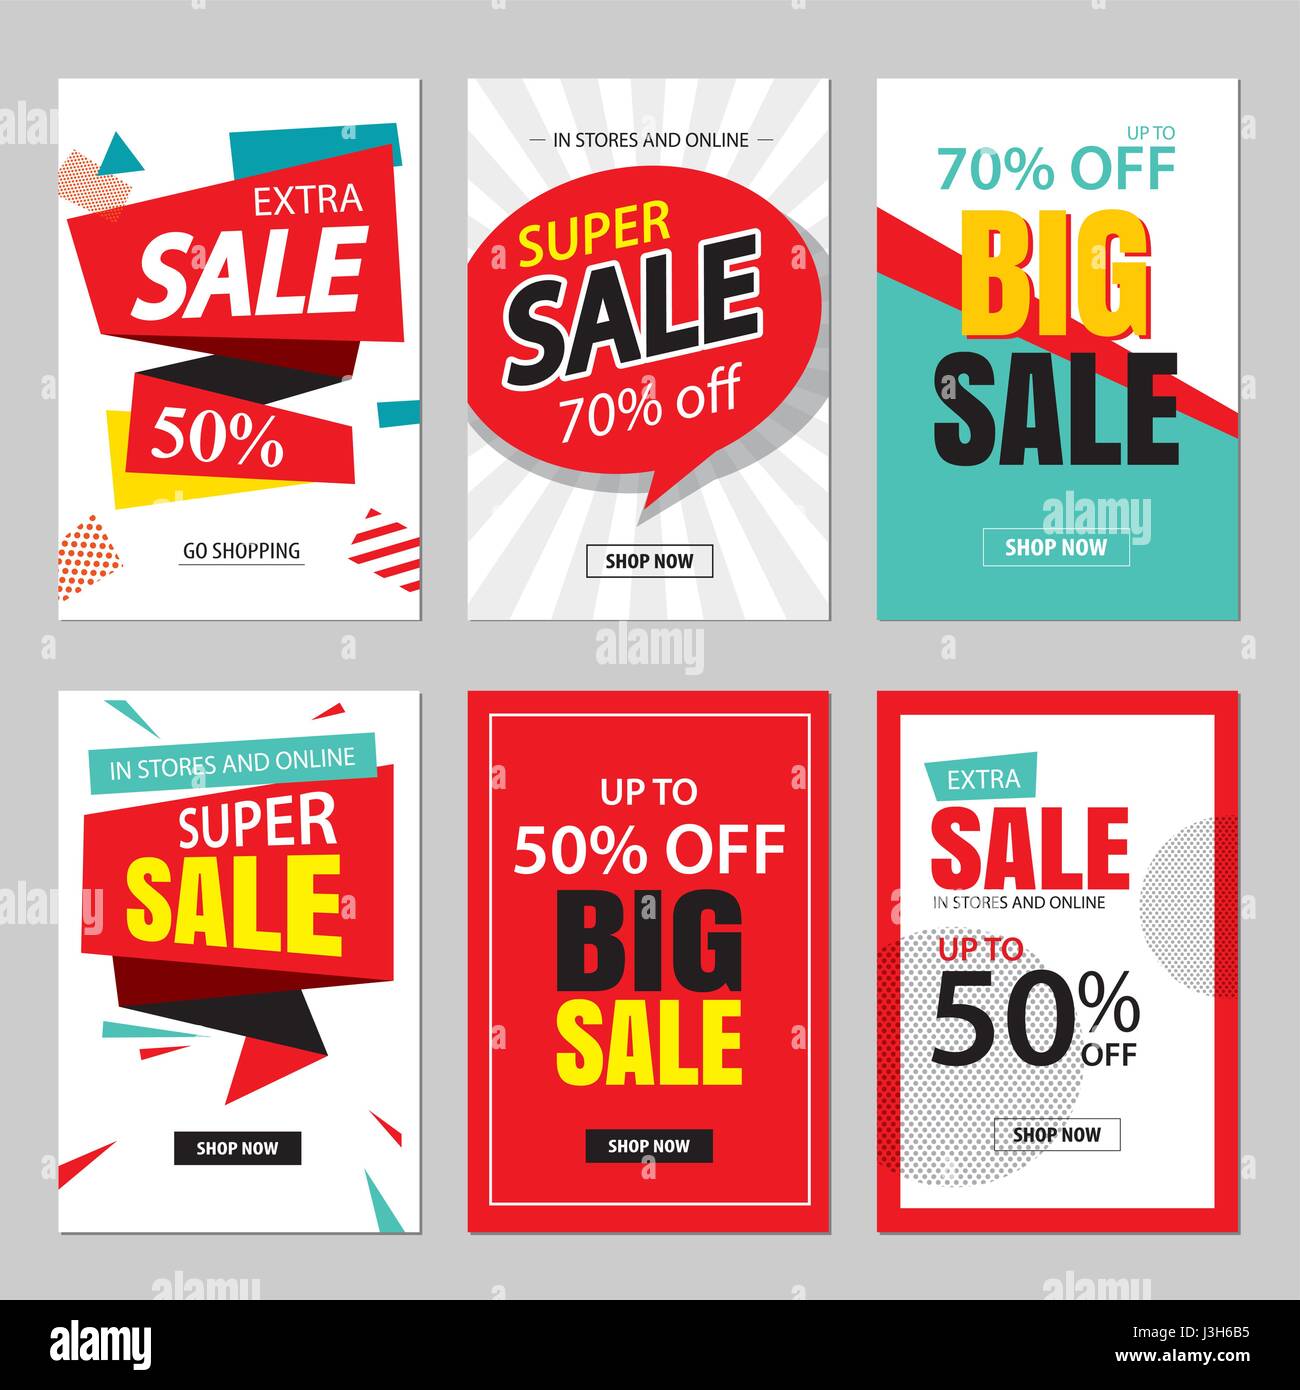 Set of sale website banner templates.Social media banners for online shopping. Vector illustrations for posters, email and newsletter designs, ads, pr Stock Vector